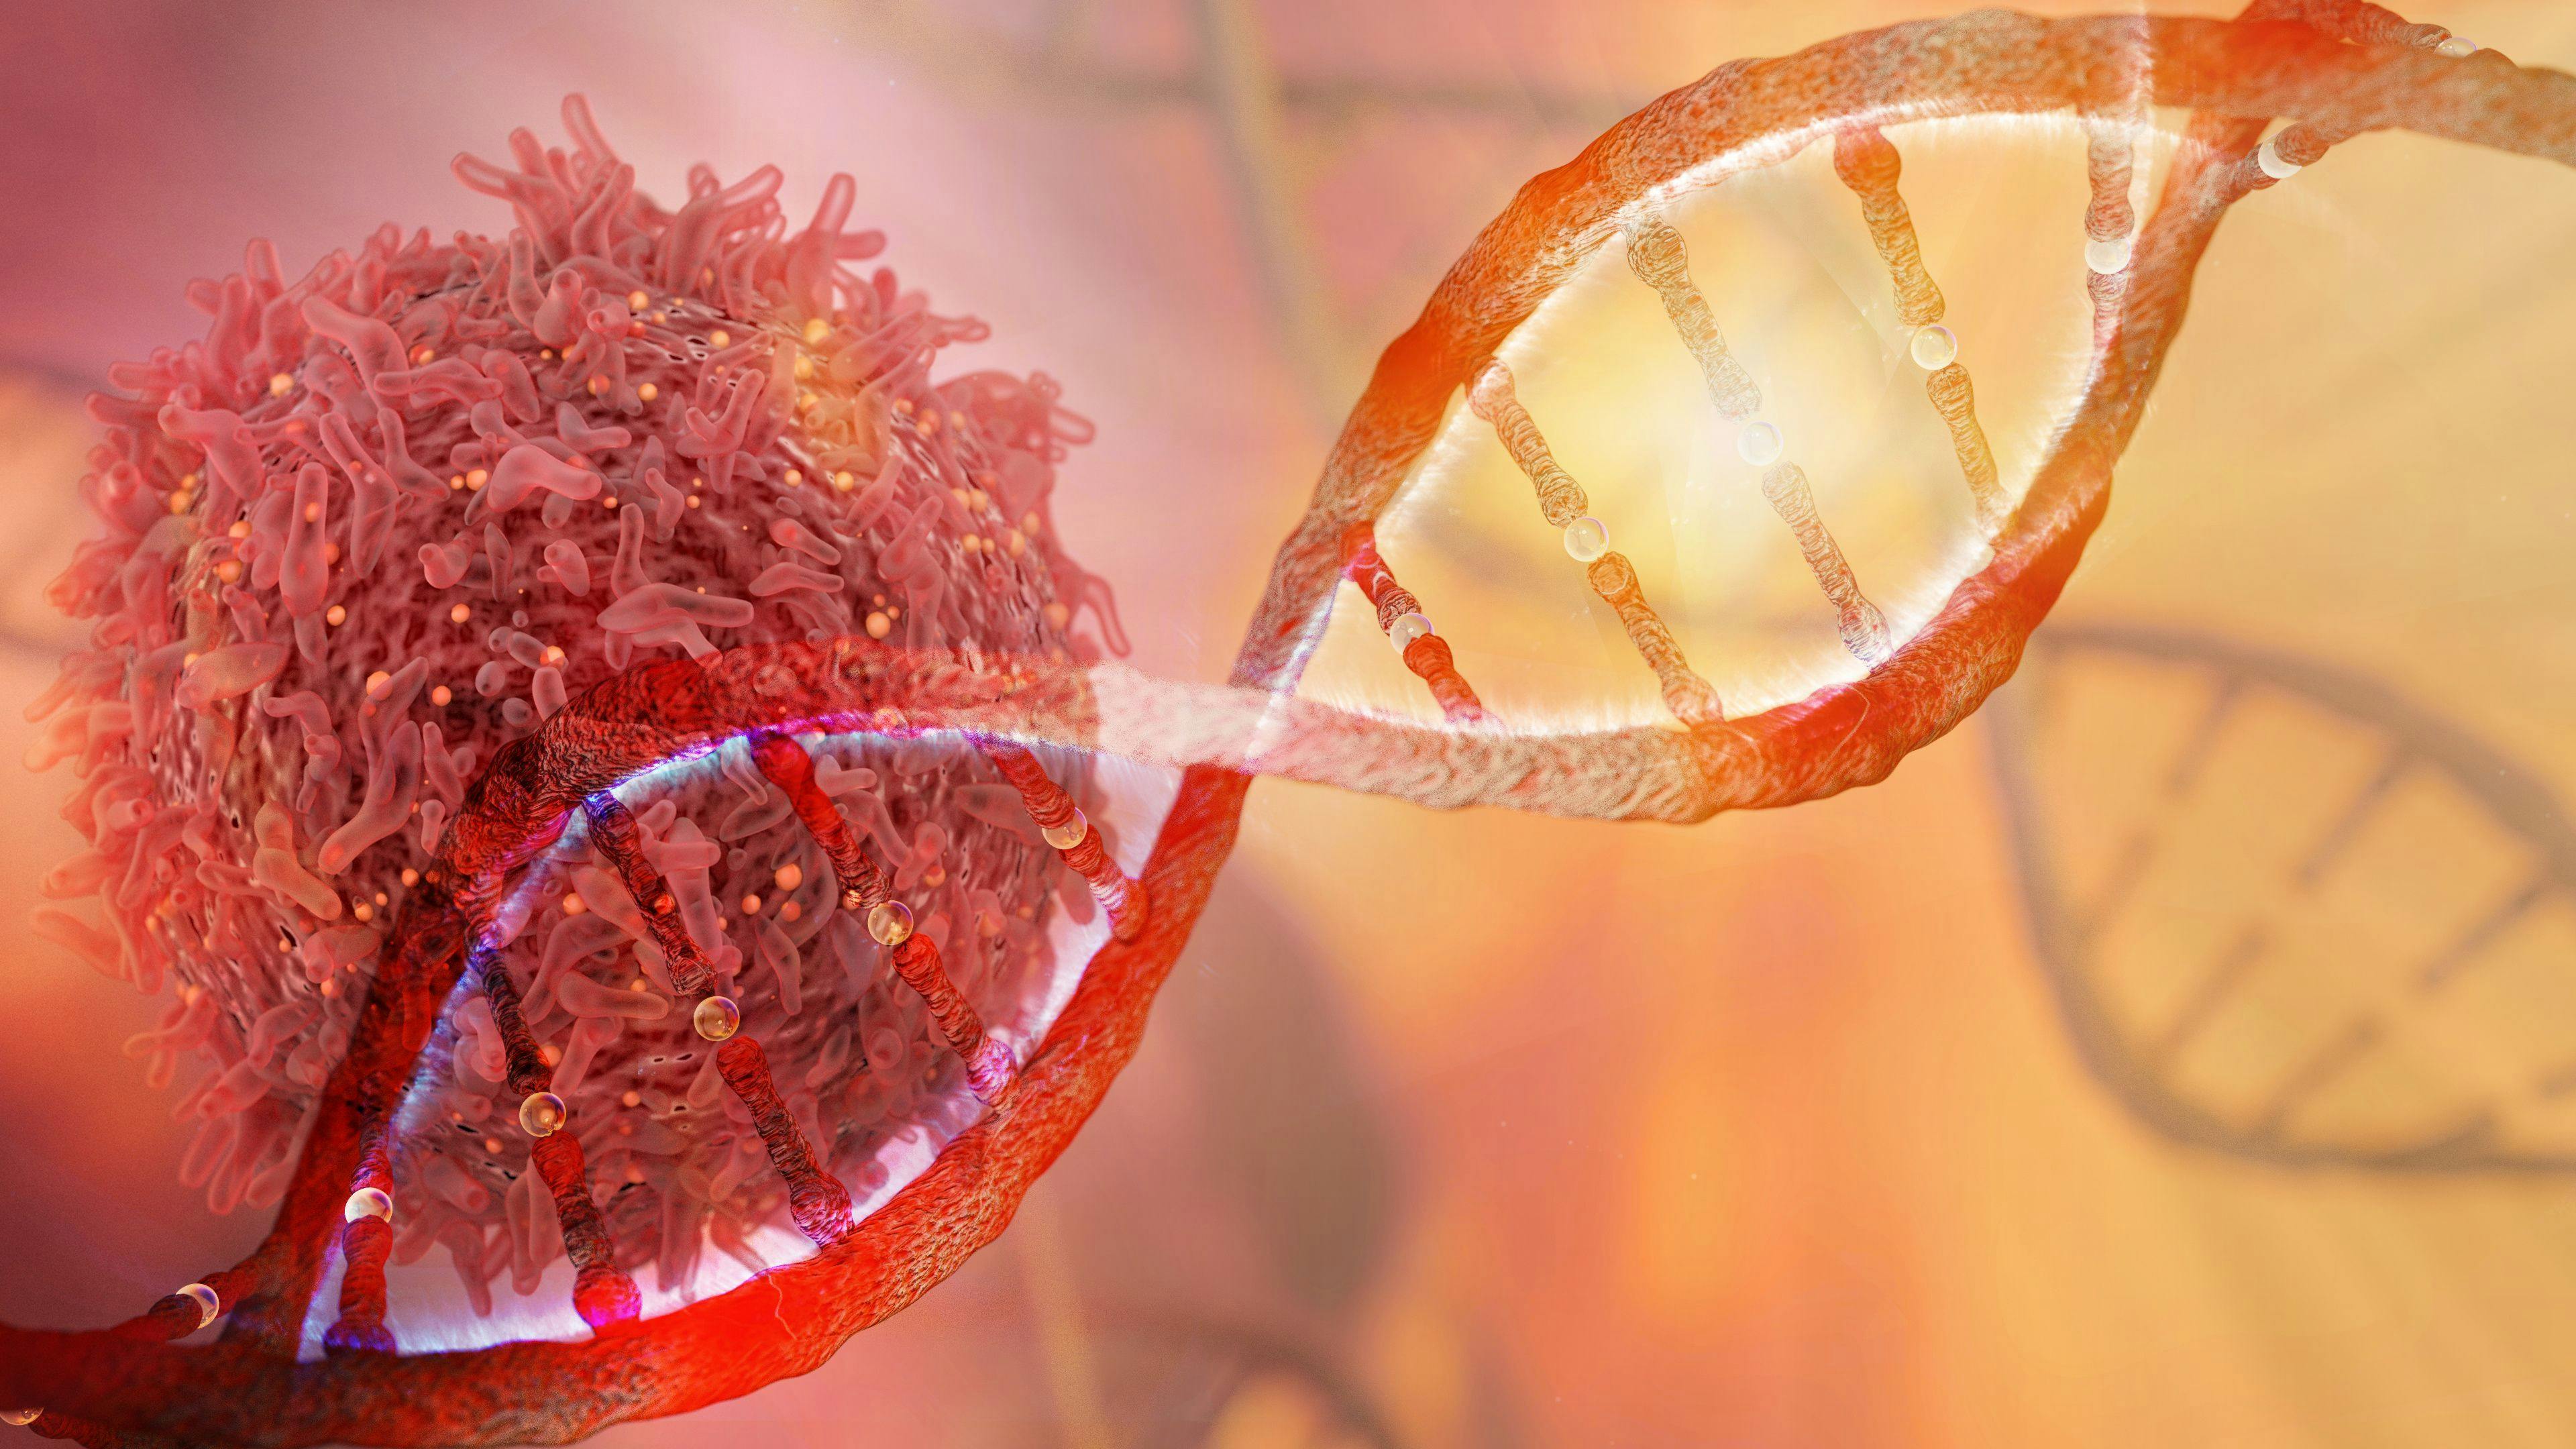 DNA strand and Cancer Cell Oncology Research Concept 3D rendering: ©catalin - stock.adobe.com